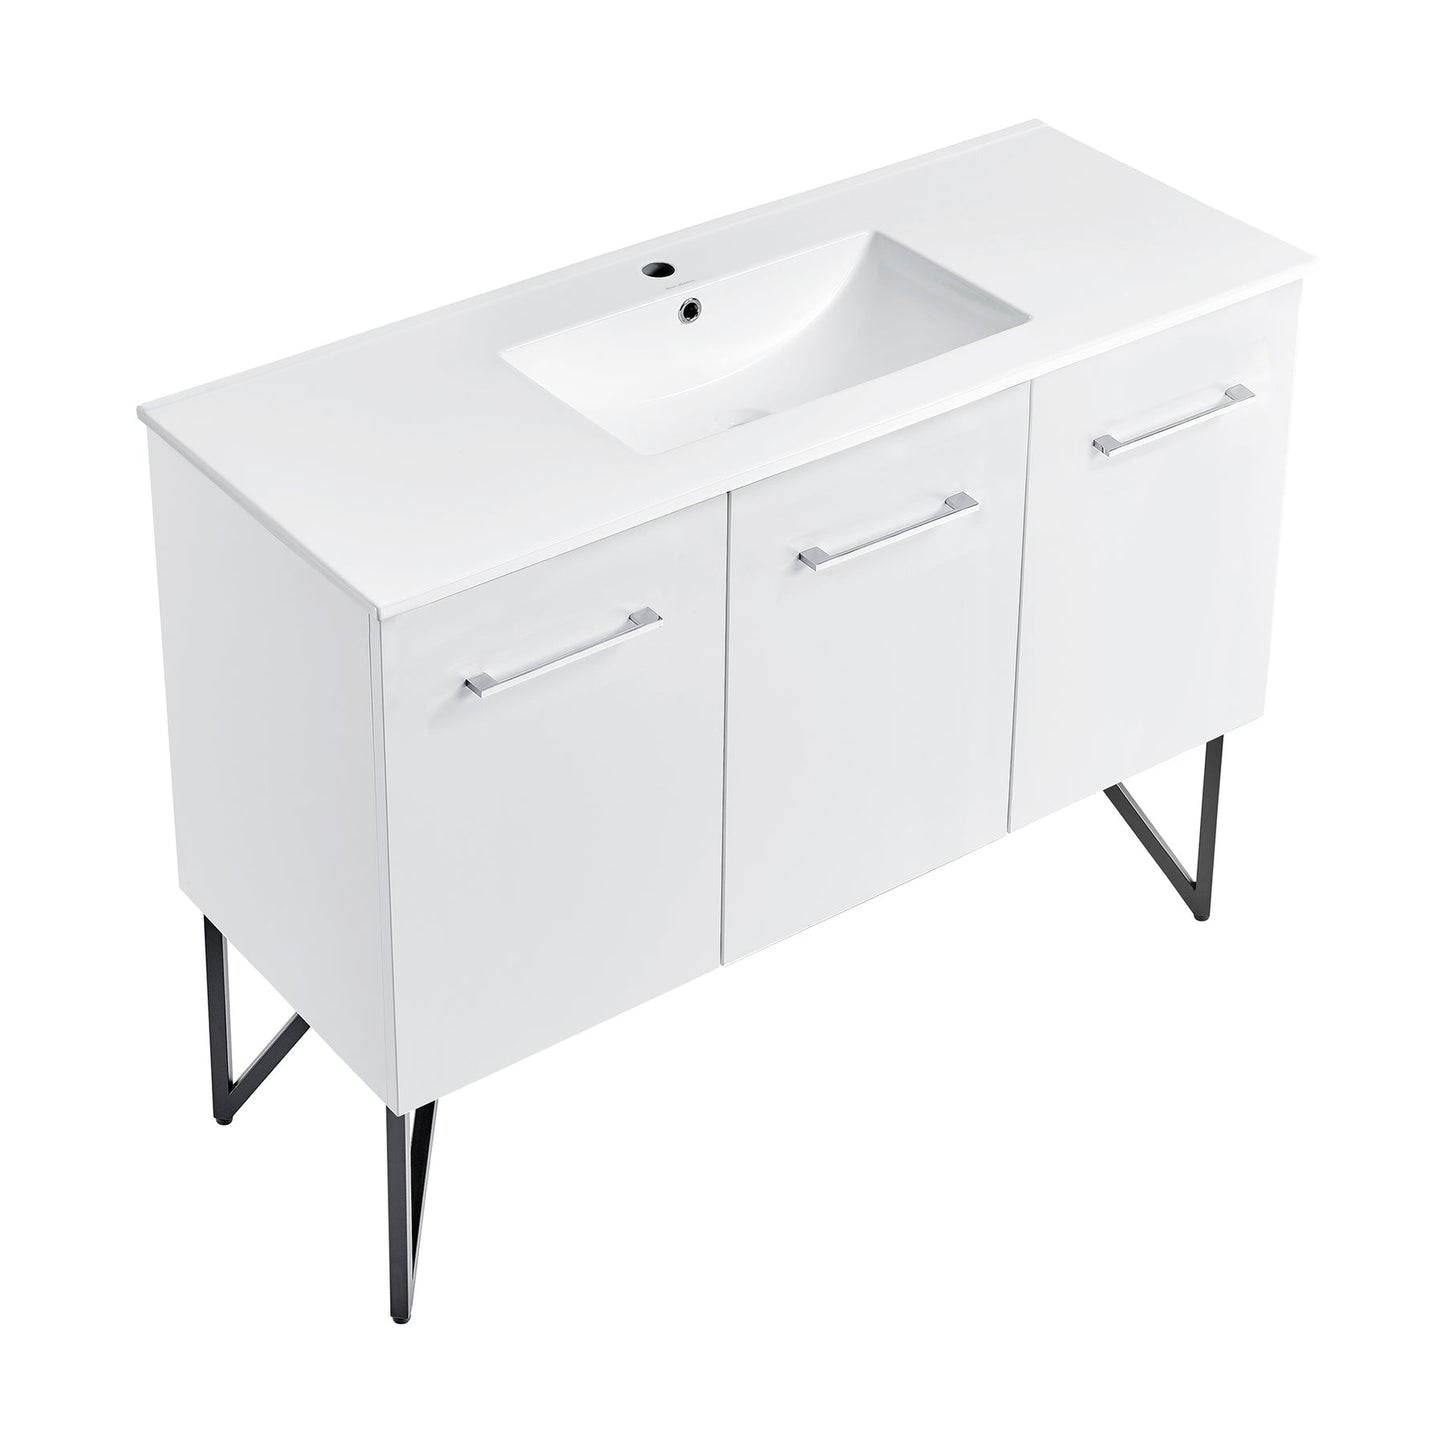 Swiss Madison Annecy 48" x 35" Freestanding White Bathroom Vanity With Ceramic Single Sink and Stainless Steel Metal Legs